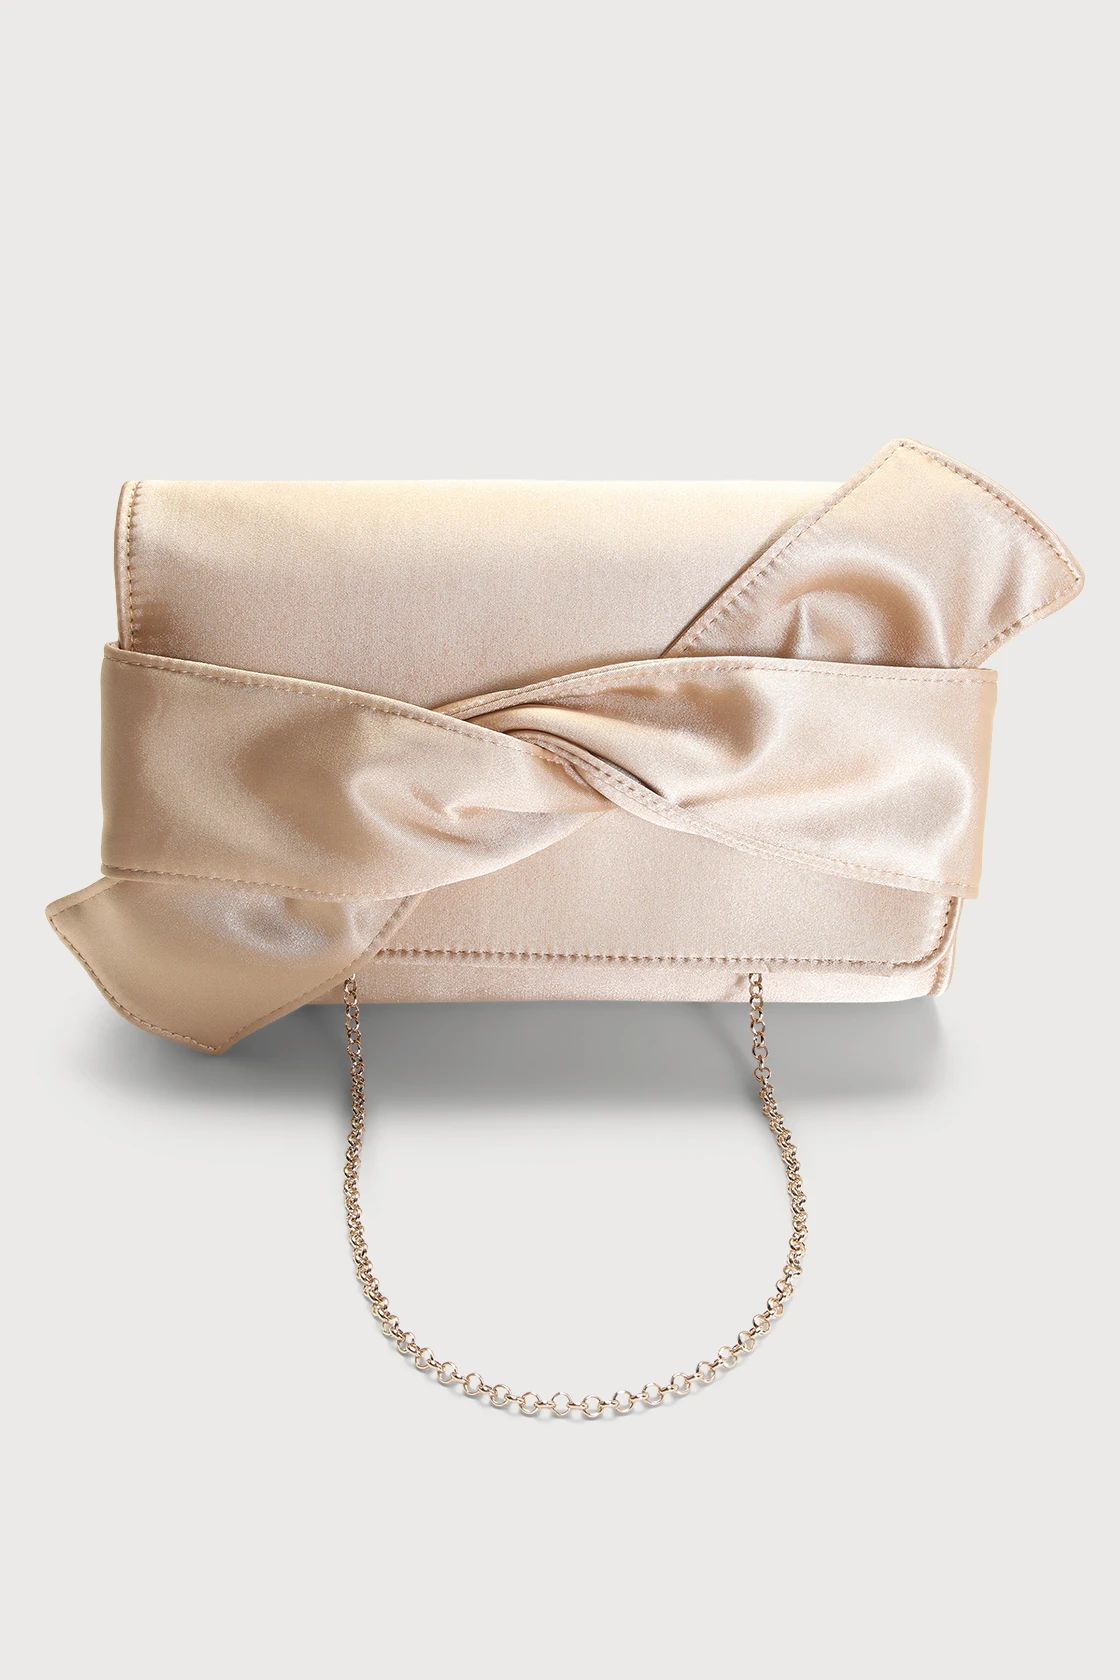 Never Been So Chic Champagne Satin Knotted Clutch | Lulus (US)